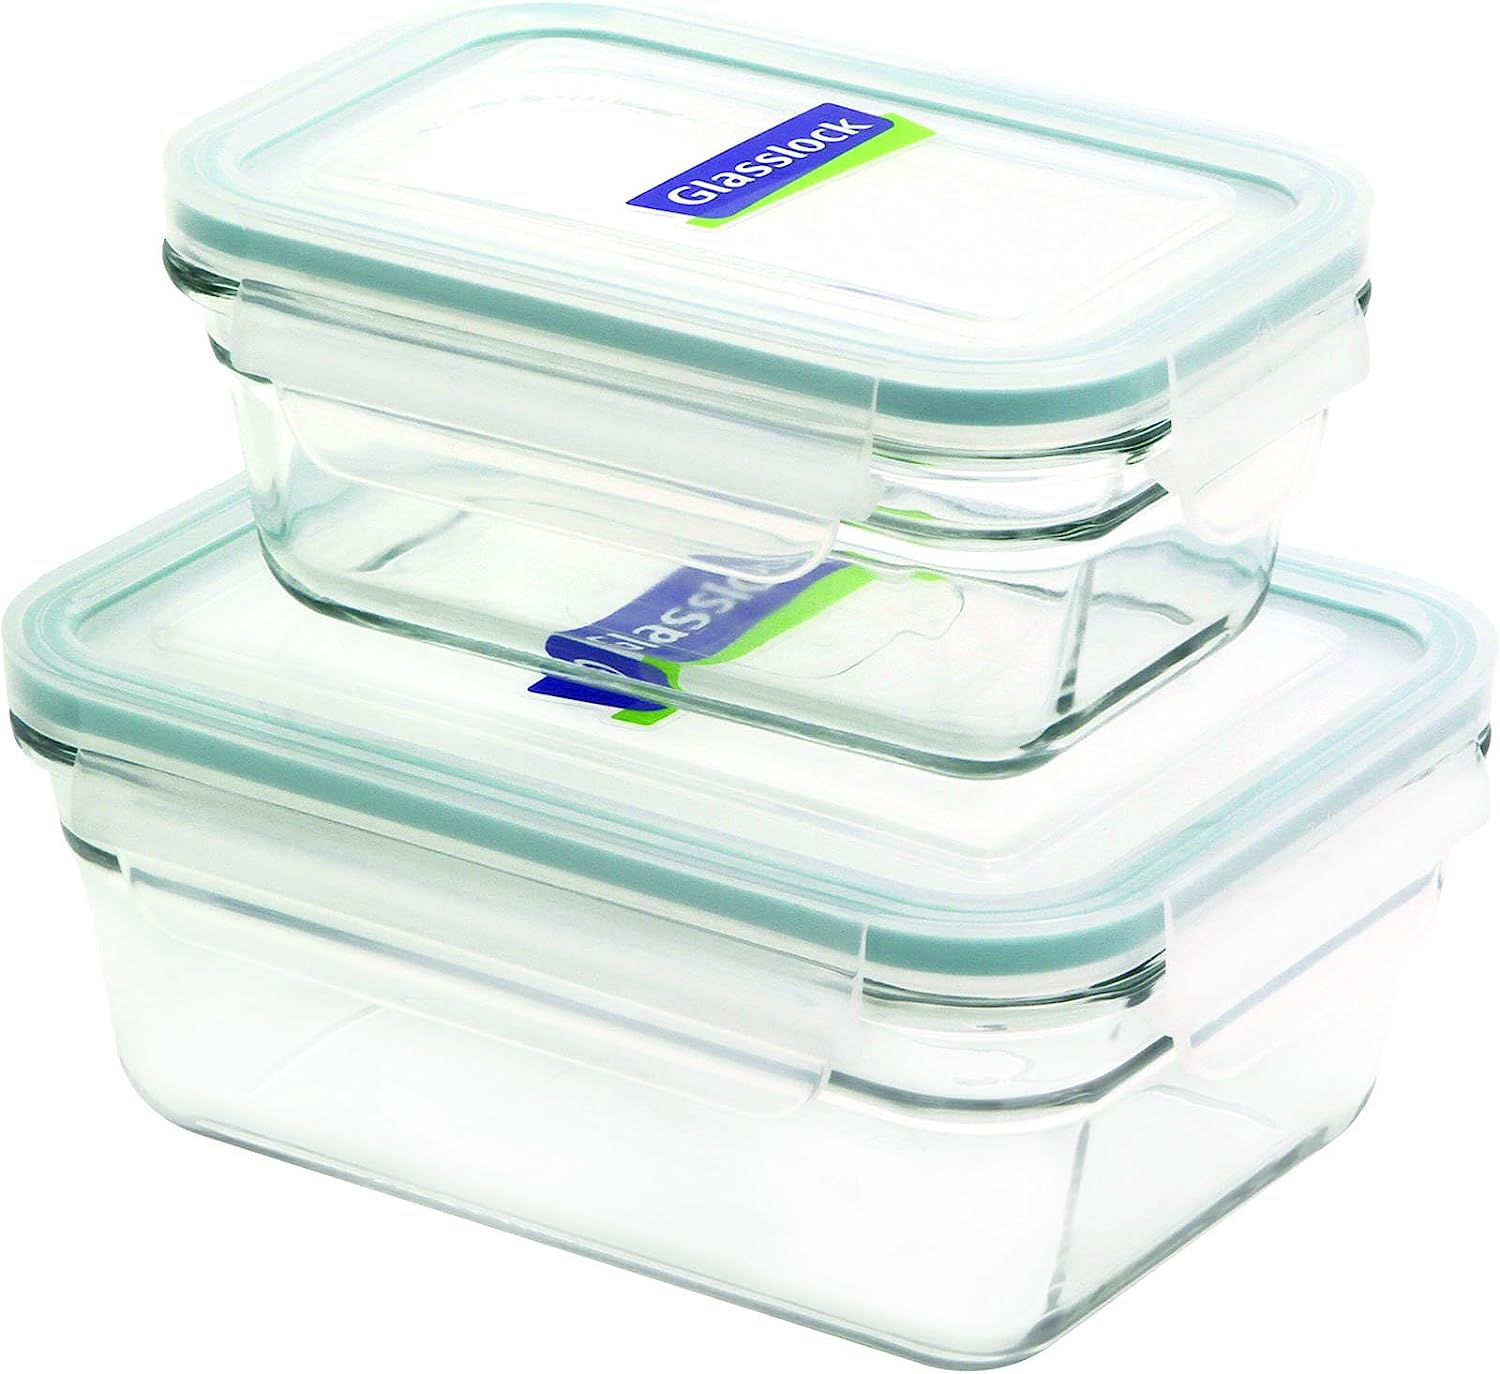 Glasslock 4-Piece Rectangle Oven Safe Container Set